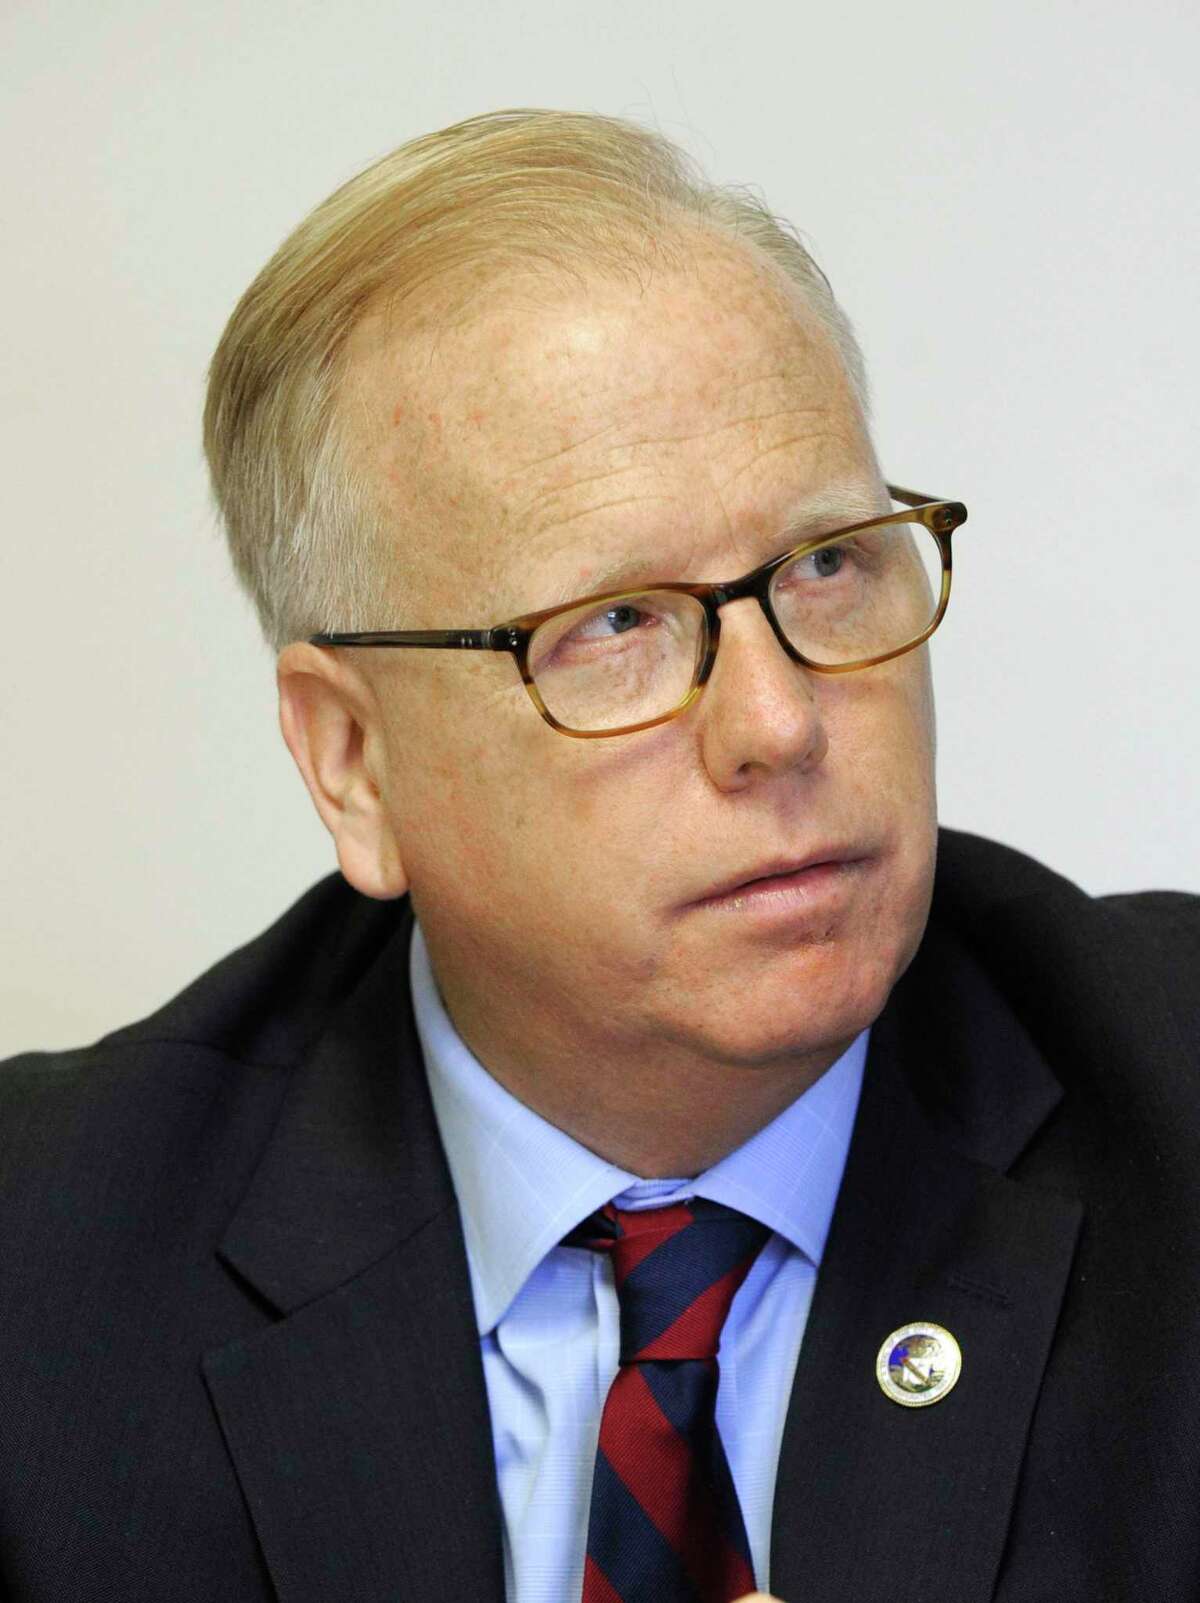 Longtime Danbury Mayor Mark Boughton, a Republican, will be taking a job running the state Department of Revenue Services under Democratic Gov. Ned Lamont.